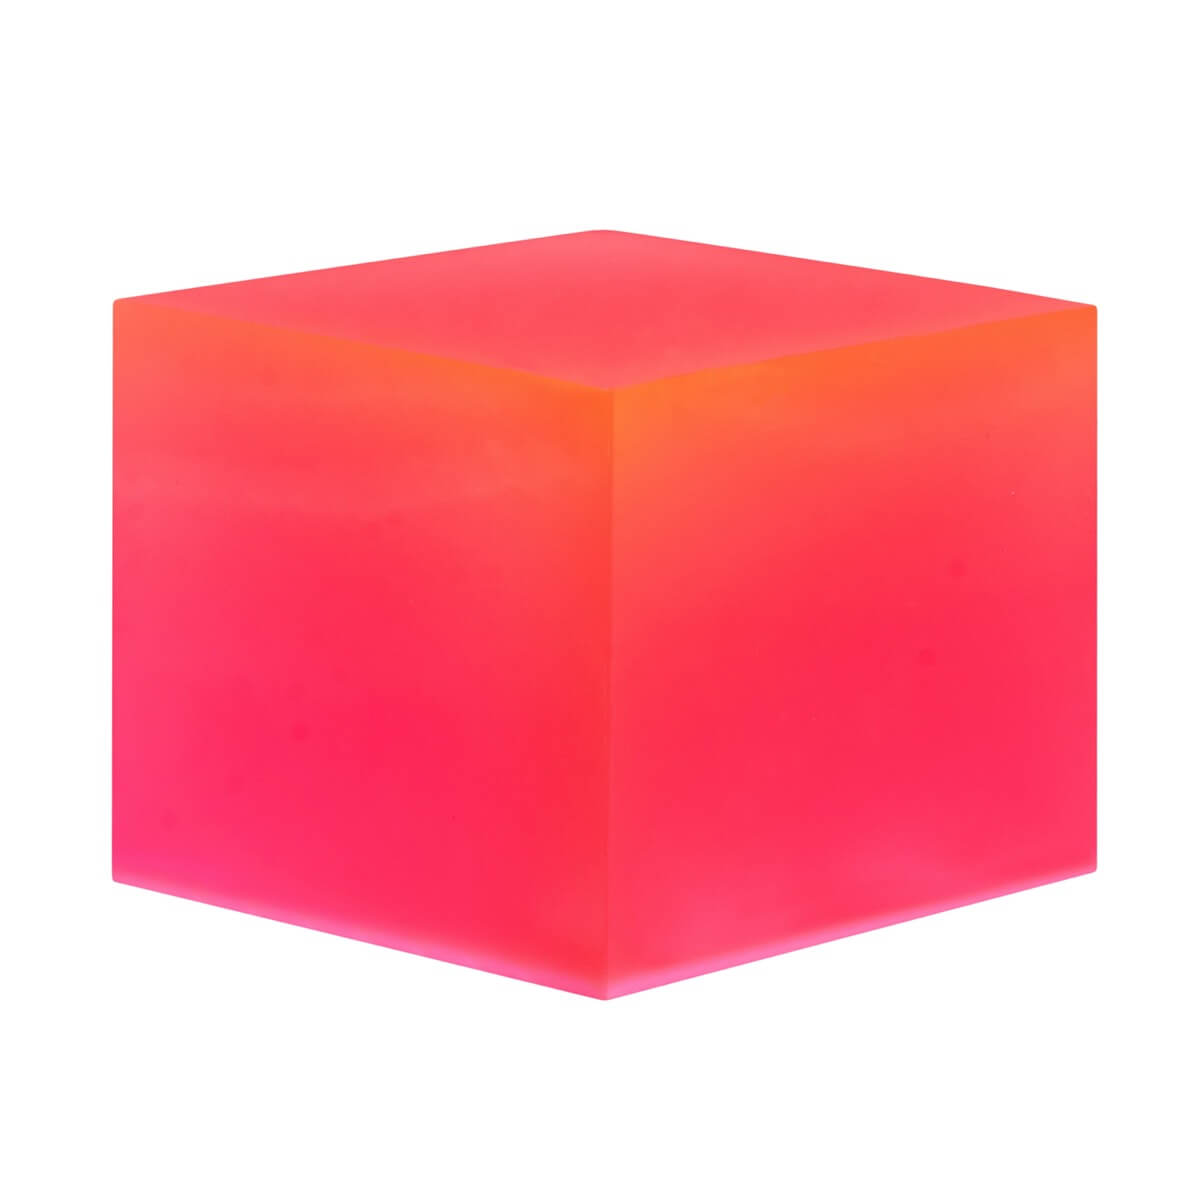 A resin cube made with the Neon Pink Mica Powder Pigment by Pigmently.